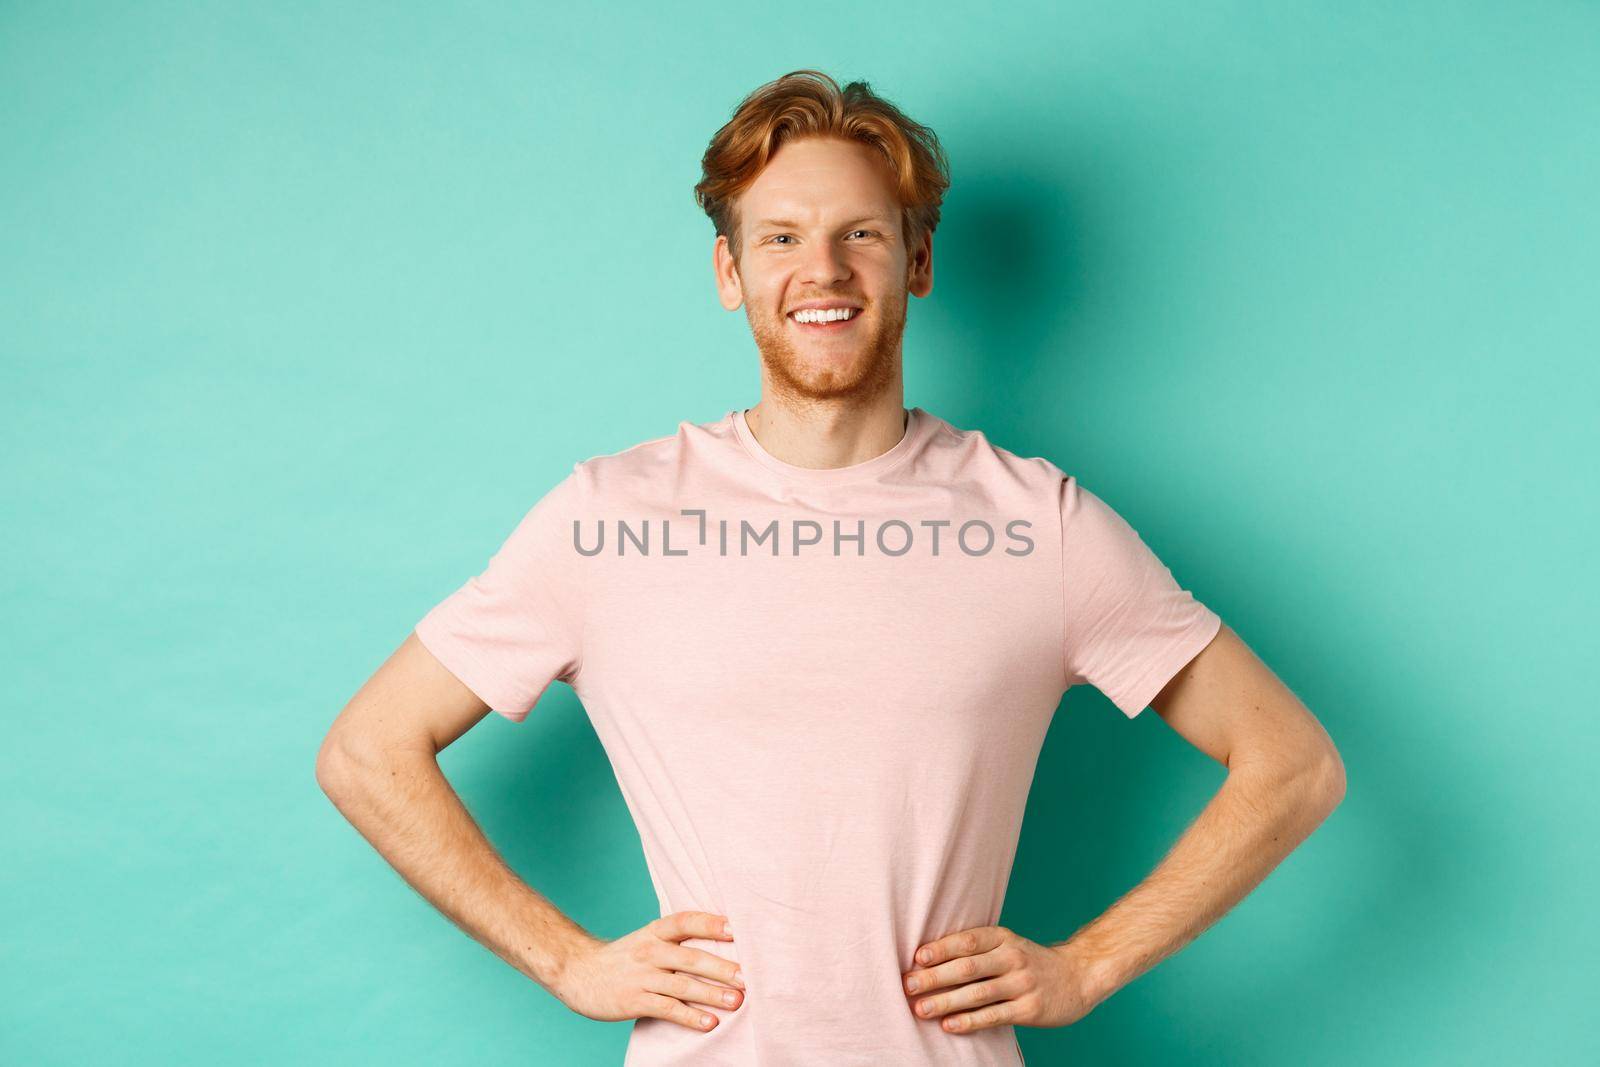 Enthusiastic young man with red hair, wearing t-shirt, standing happy and proud with hands on hops, standing over turquoise background.